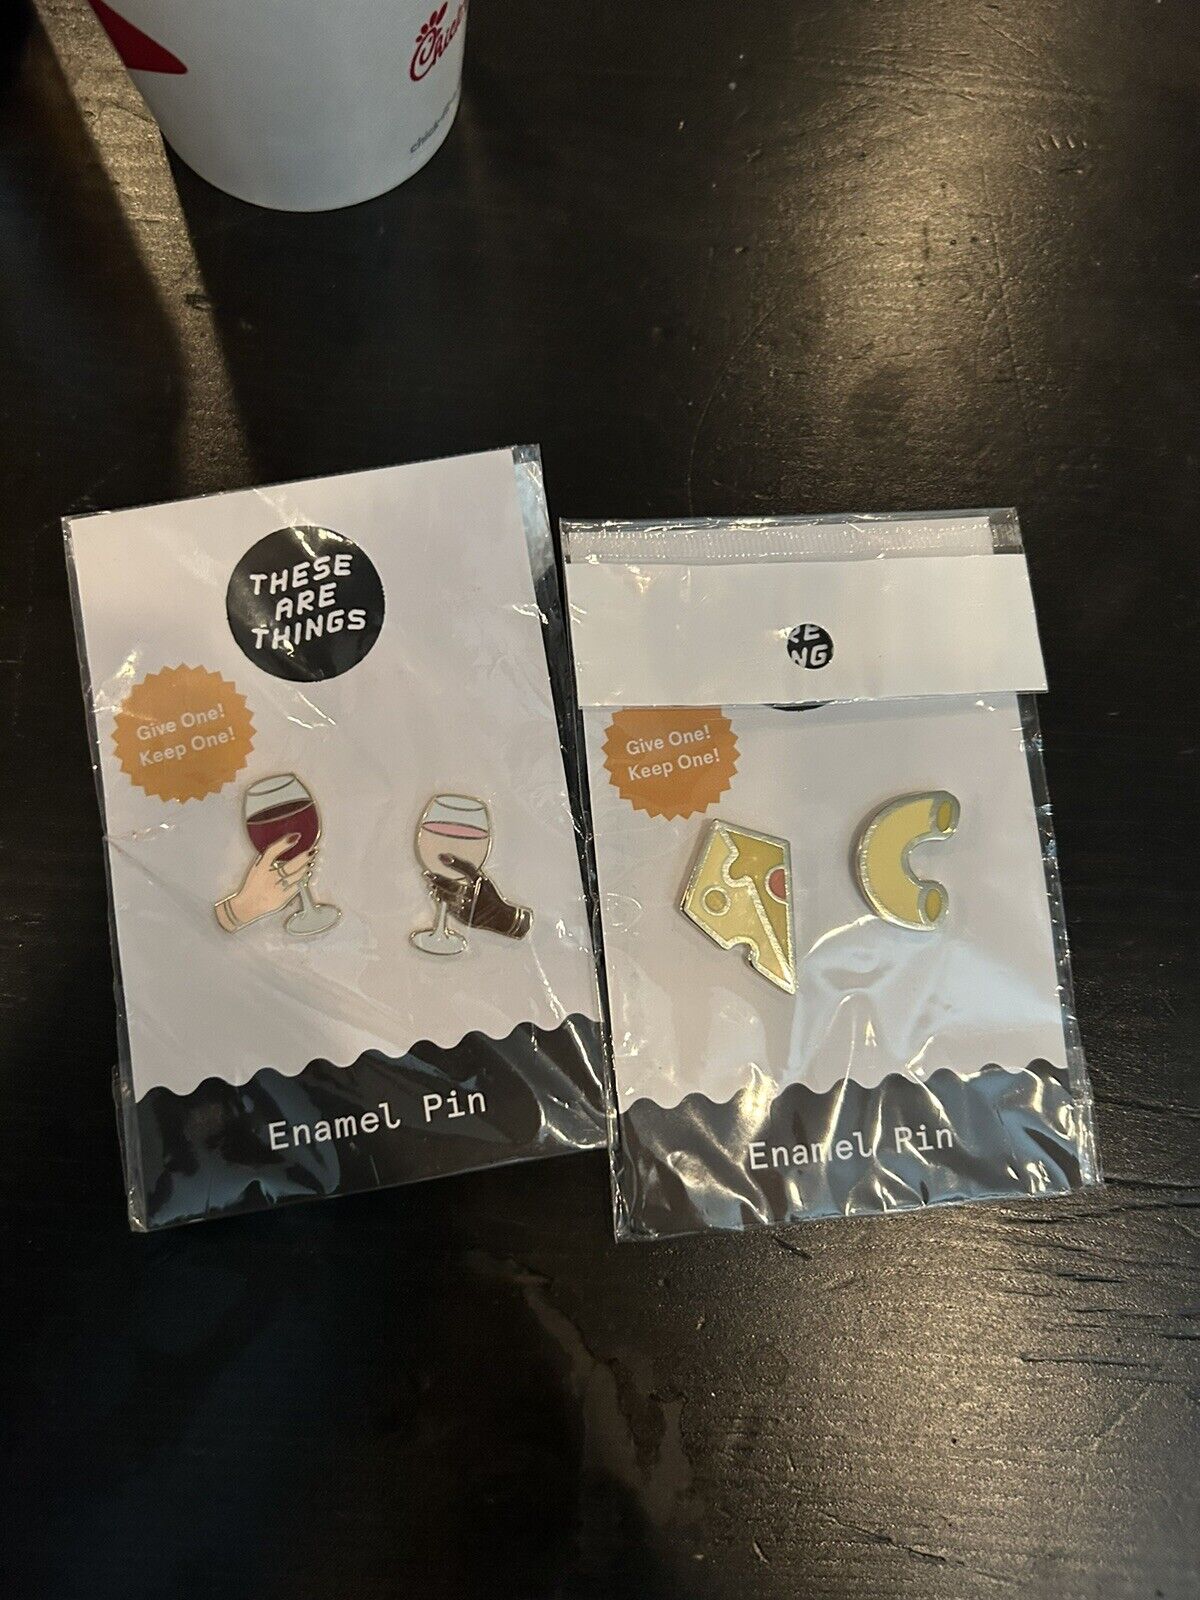 Lot of 4 These Are Things Enamel Pins - Brand New in Packages